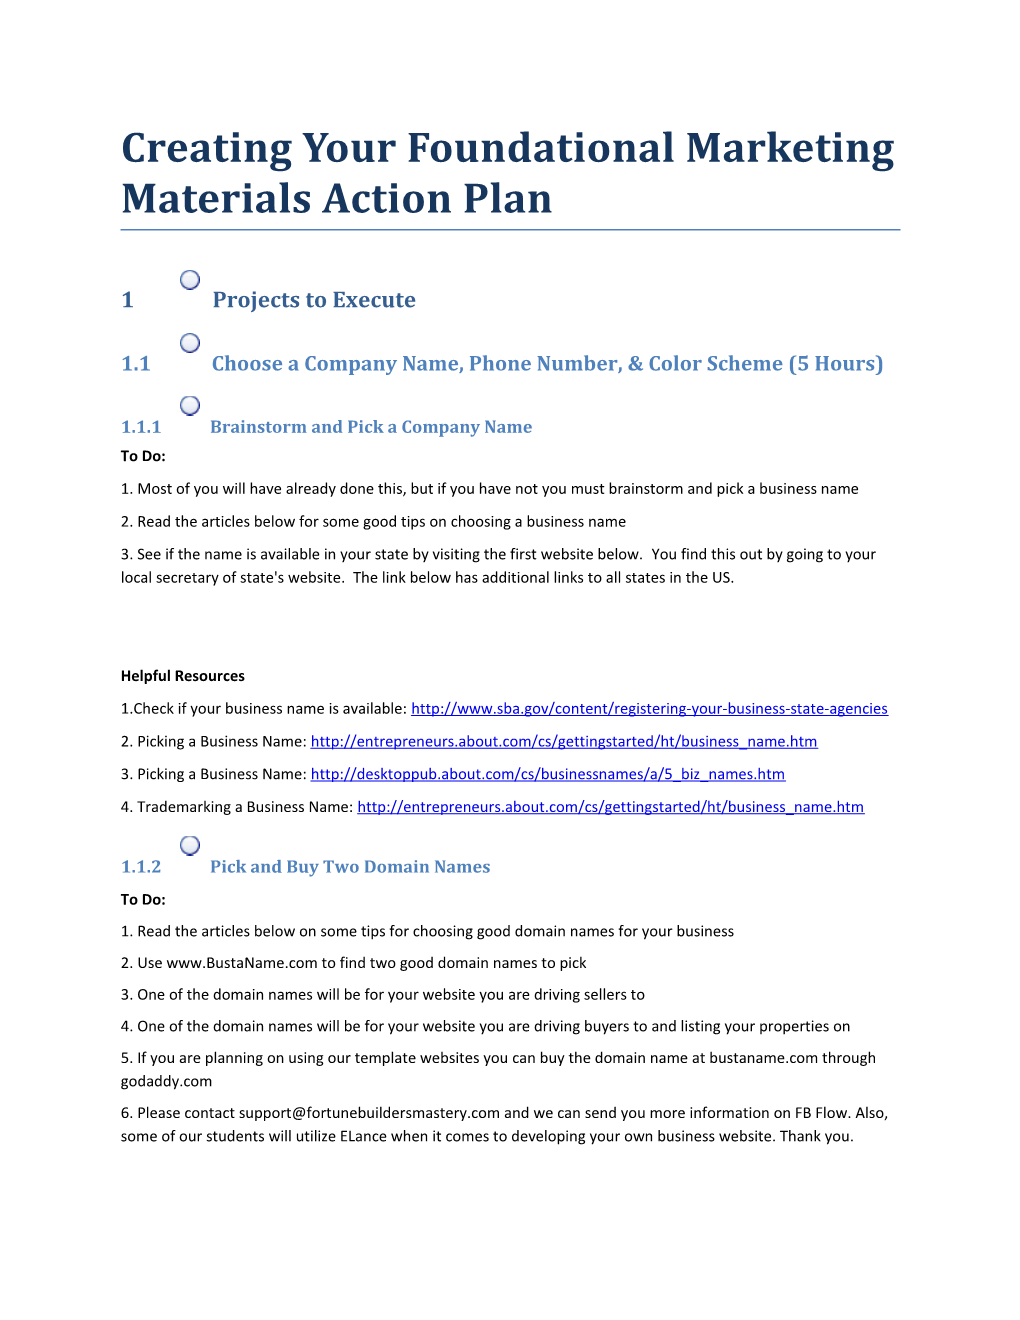 Creating Your Foundational Marketing Materials Action Plan